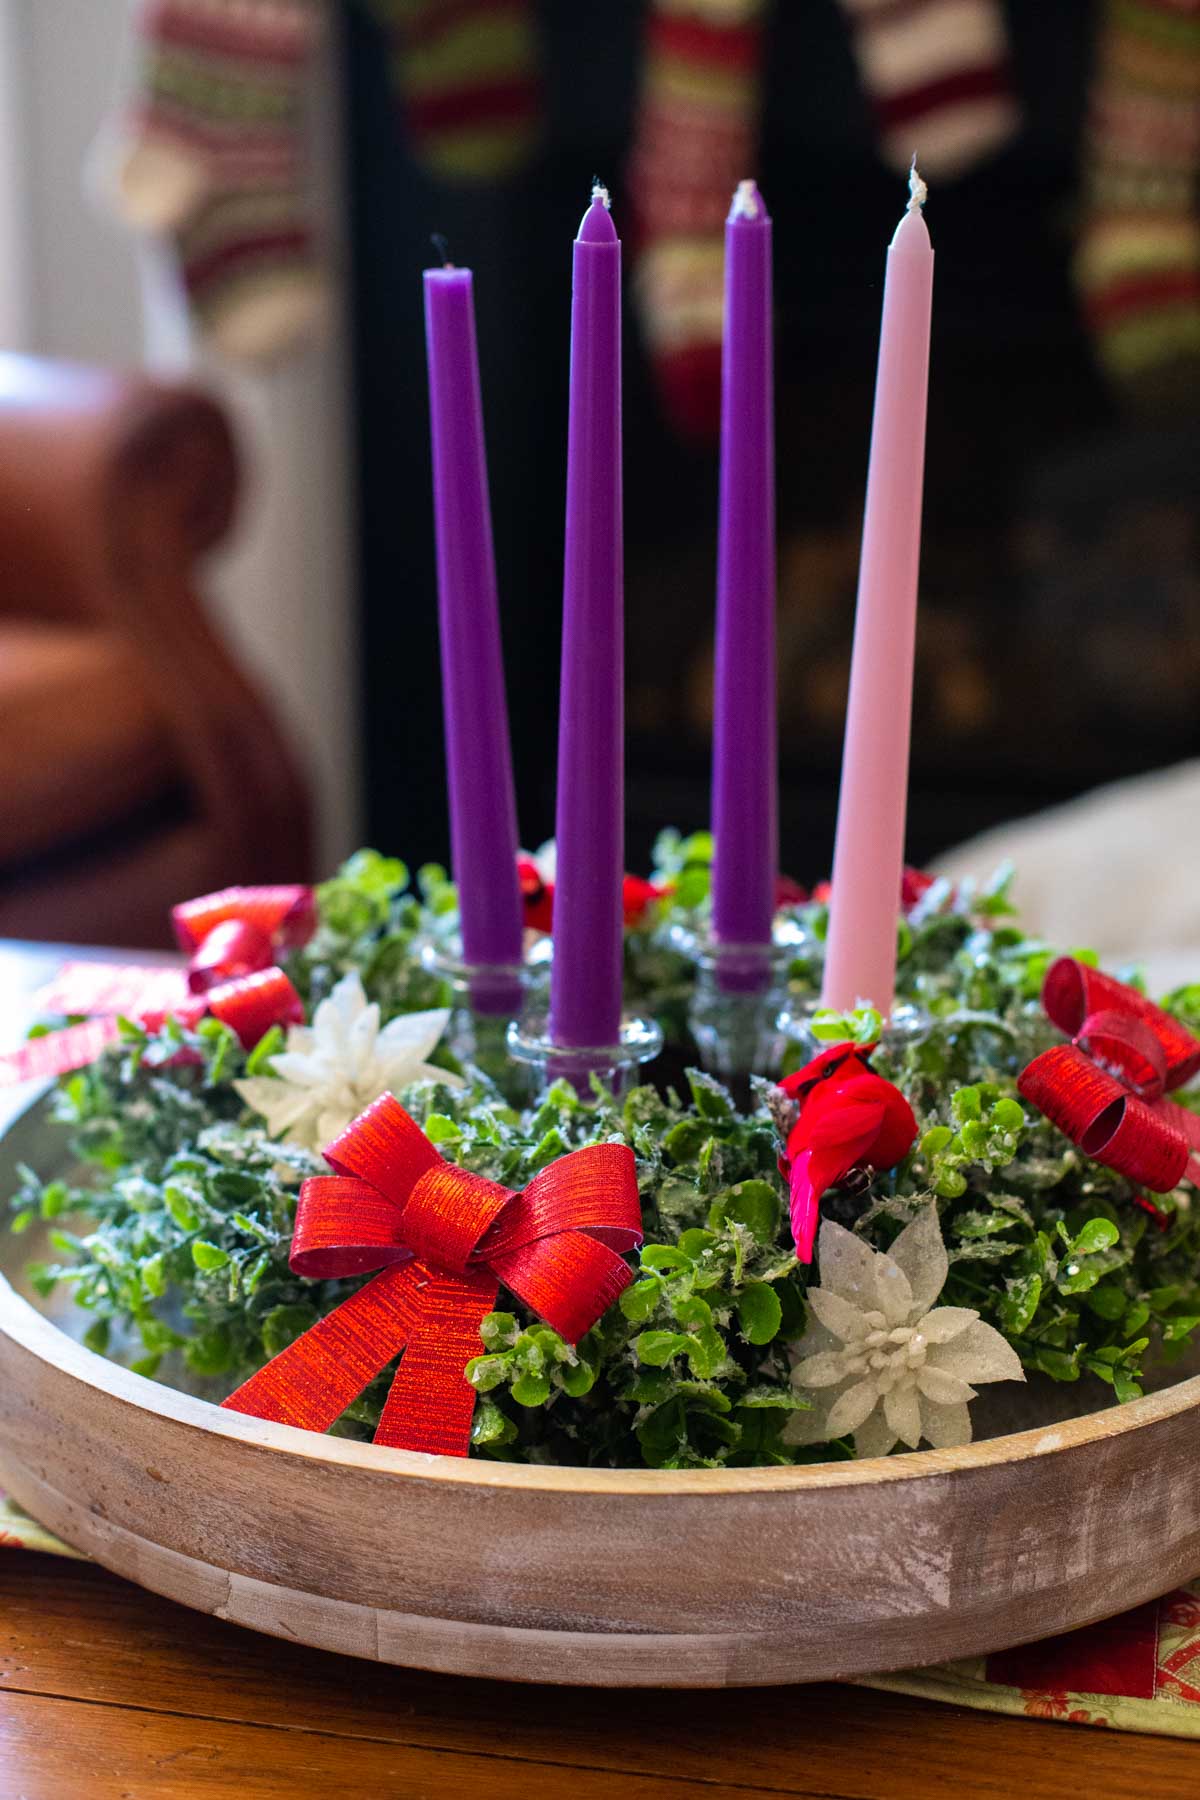 A homemade Advent wreath with purple and pink candles sits on a coffee table during the day.